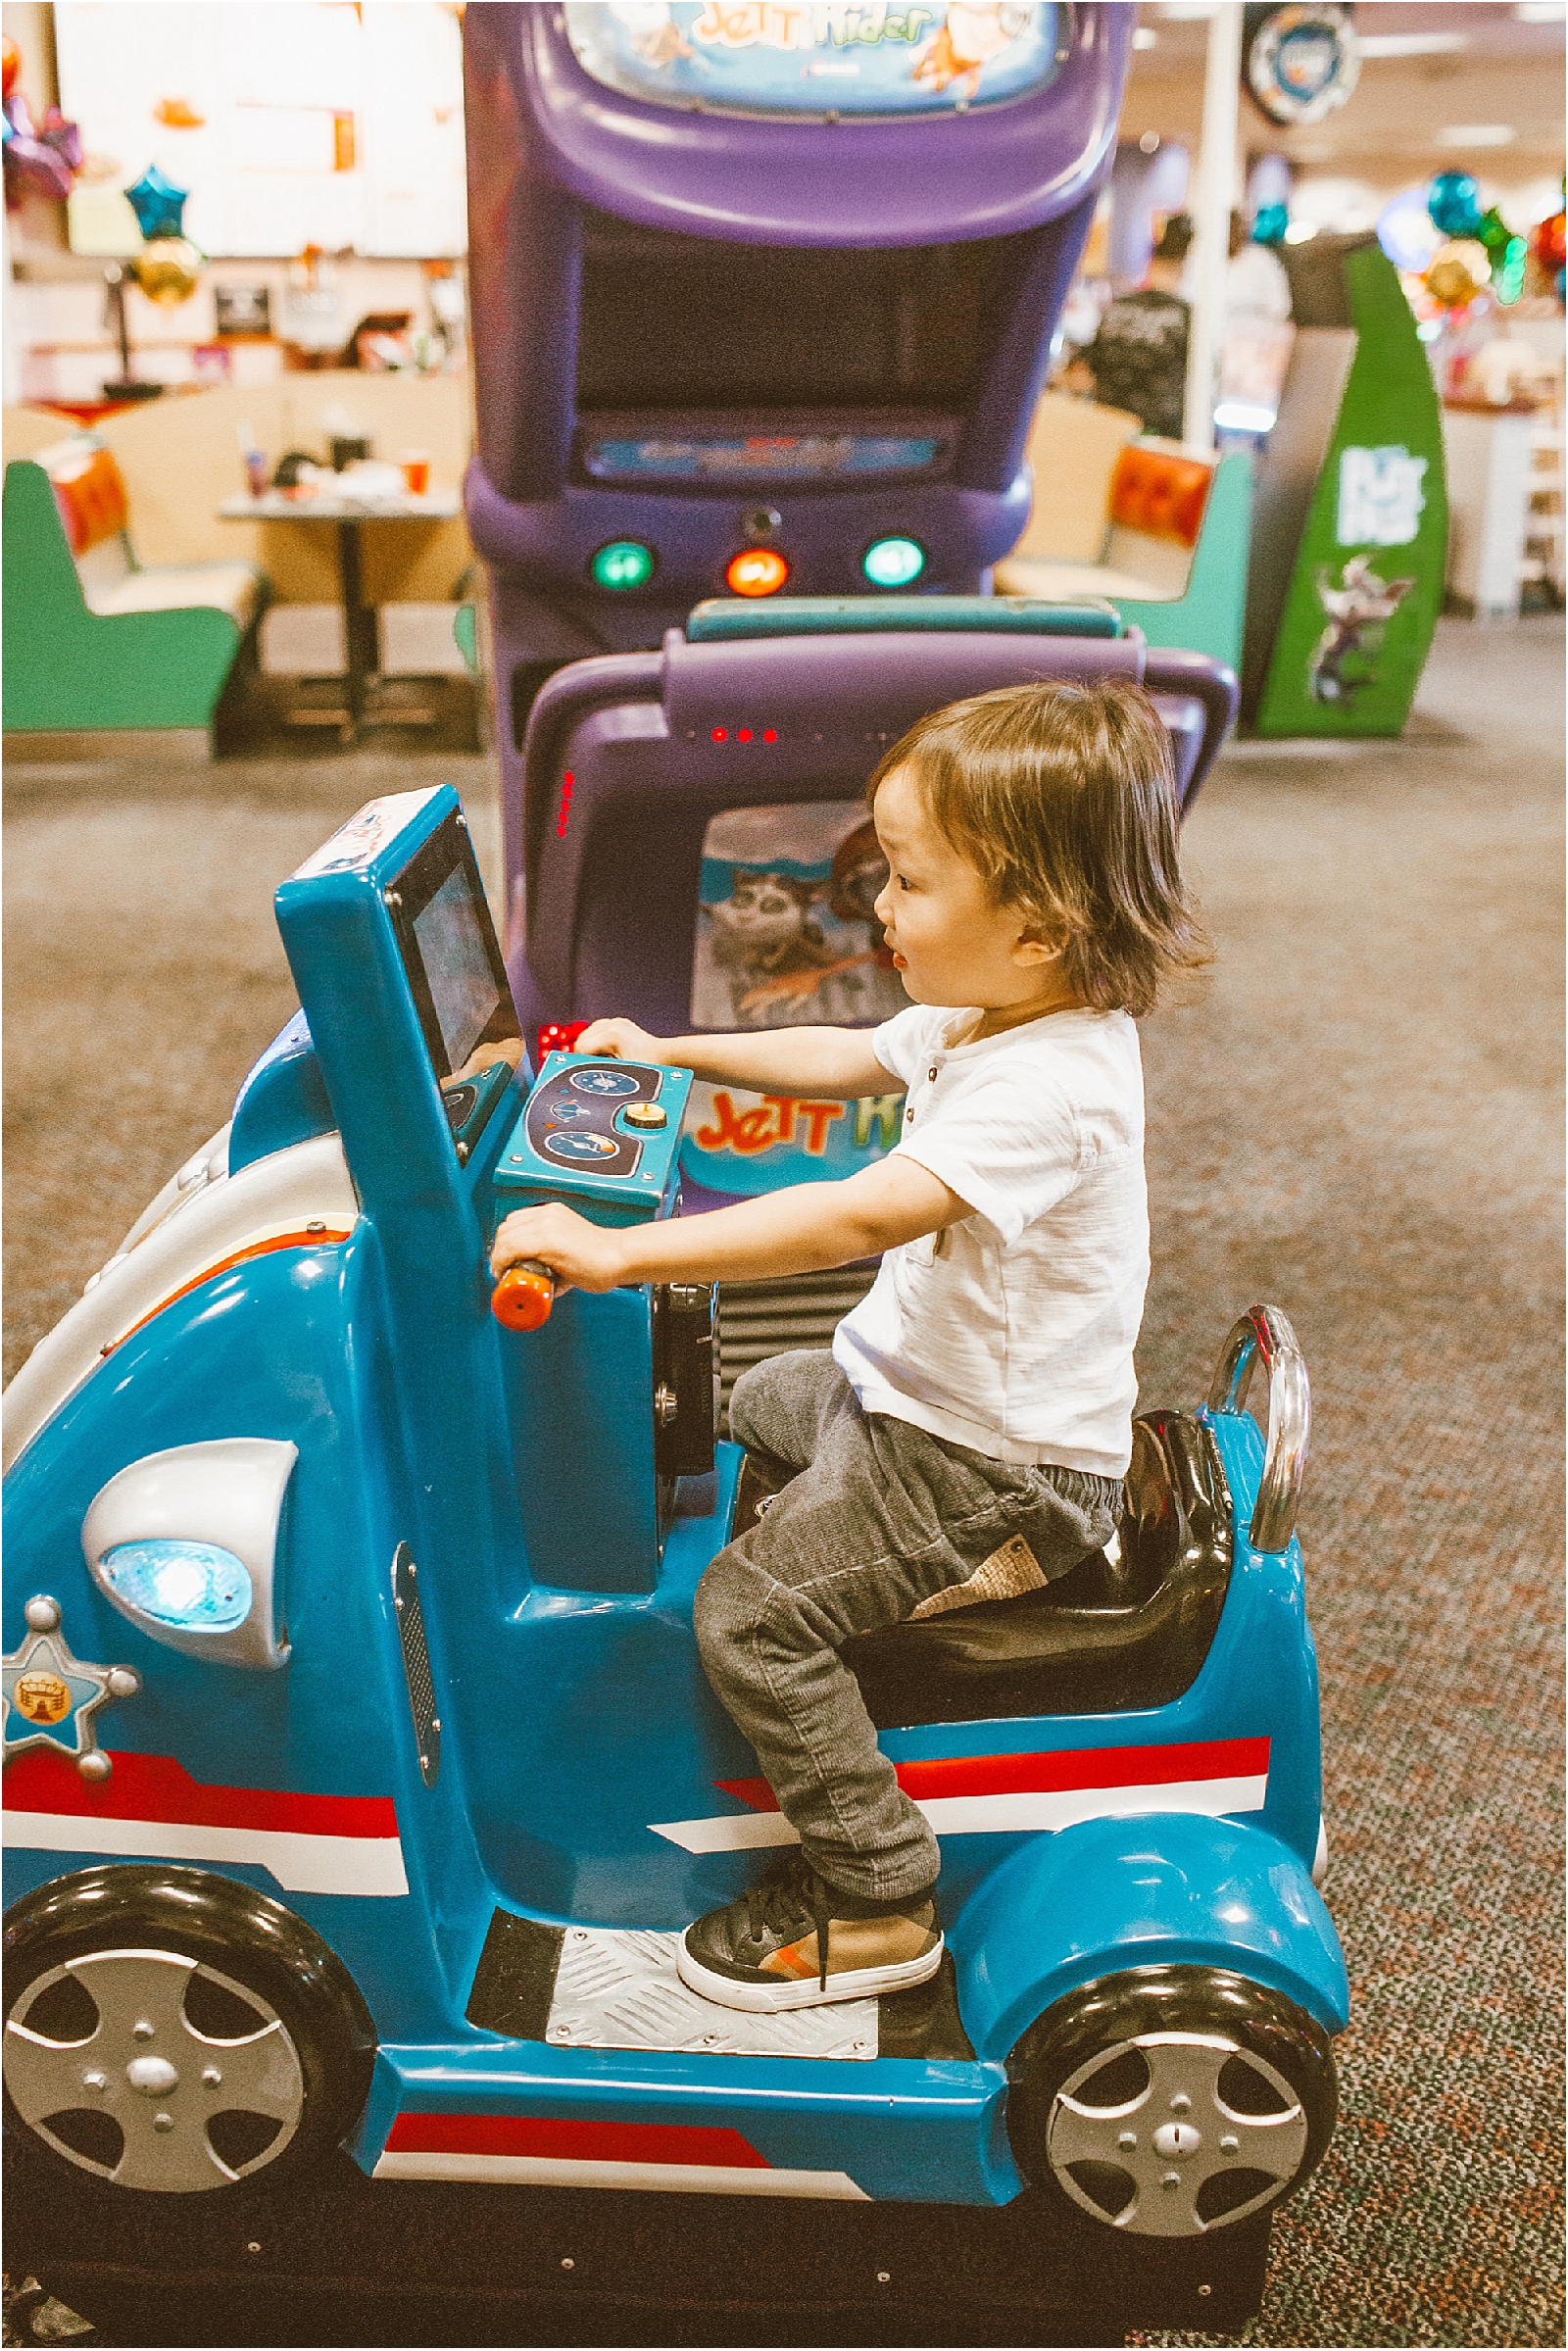 All You Can Play At Chuck E Cheese's